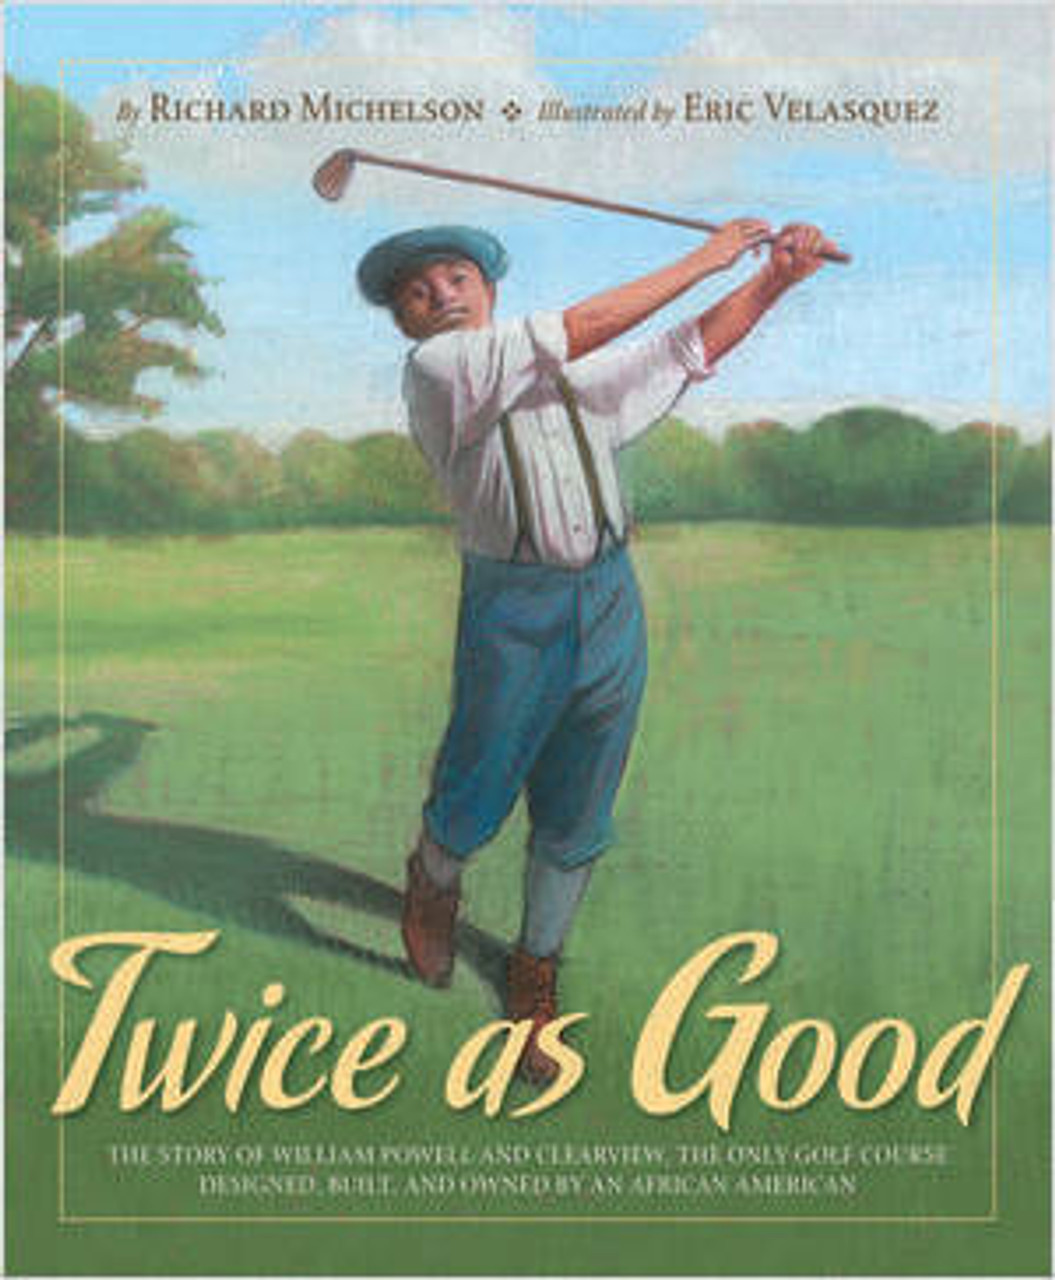 Twice as Good: The Story of William Powell and Clearview, the Only Golf Course Designed, Built, and Owned by an African American by Richard Michelson